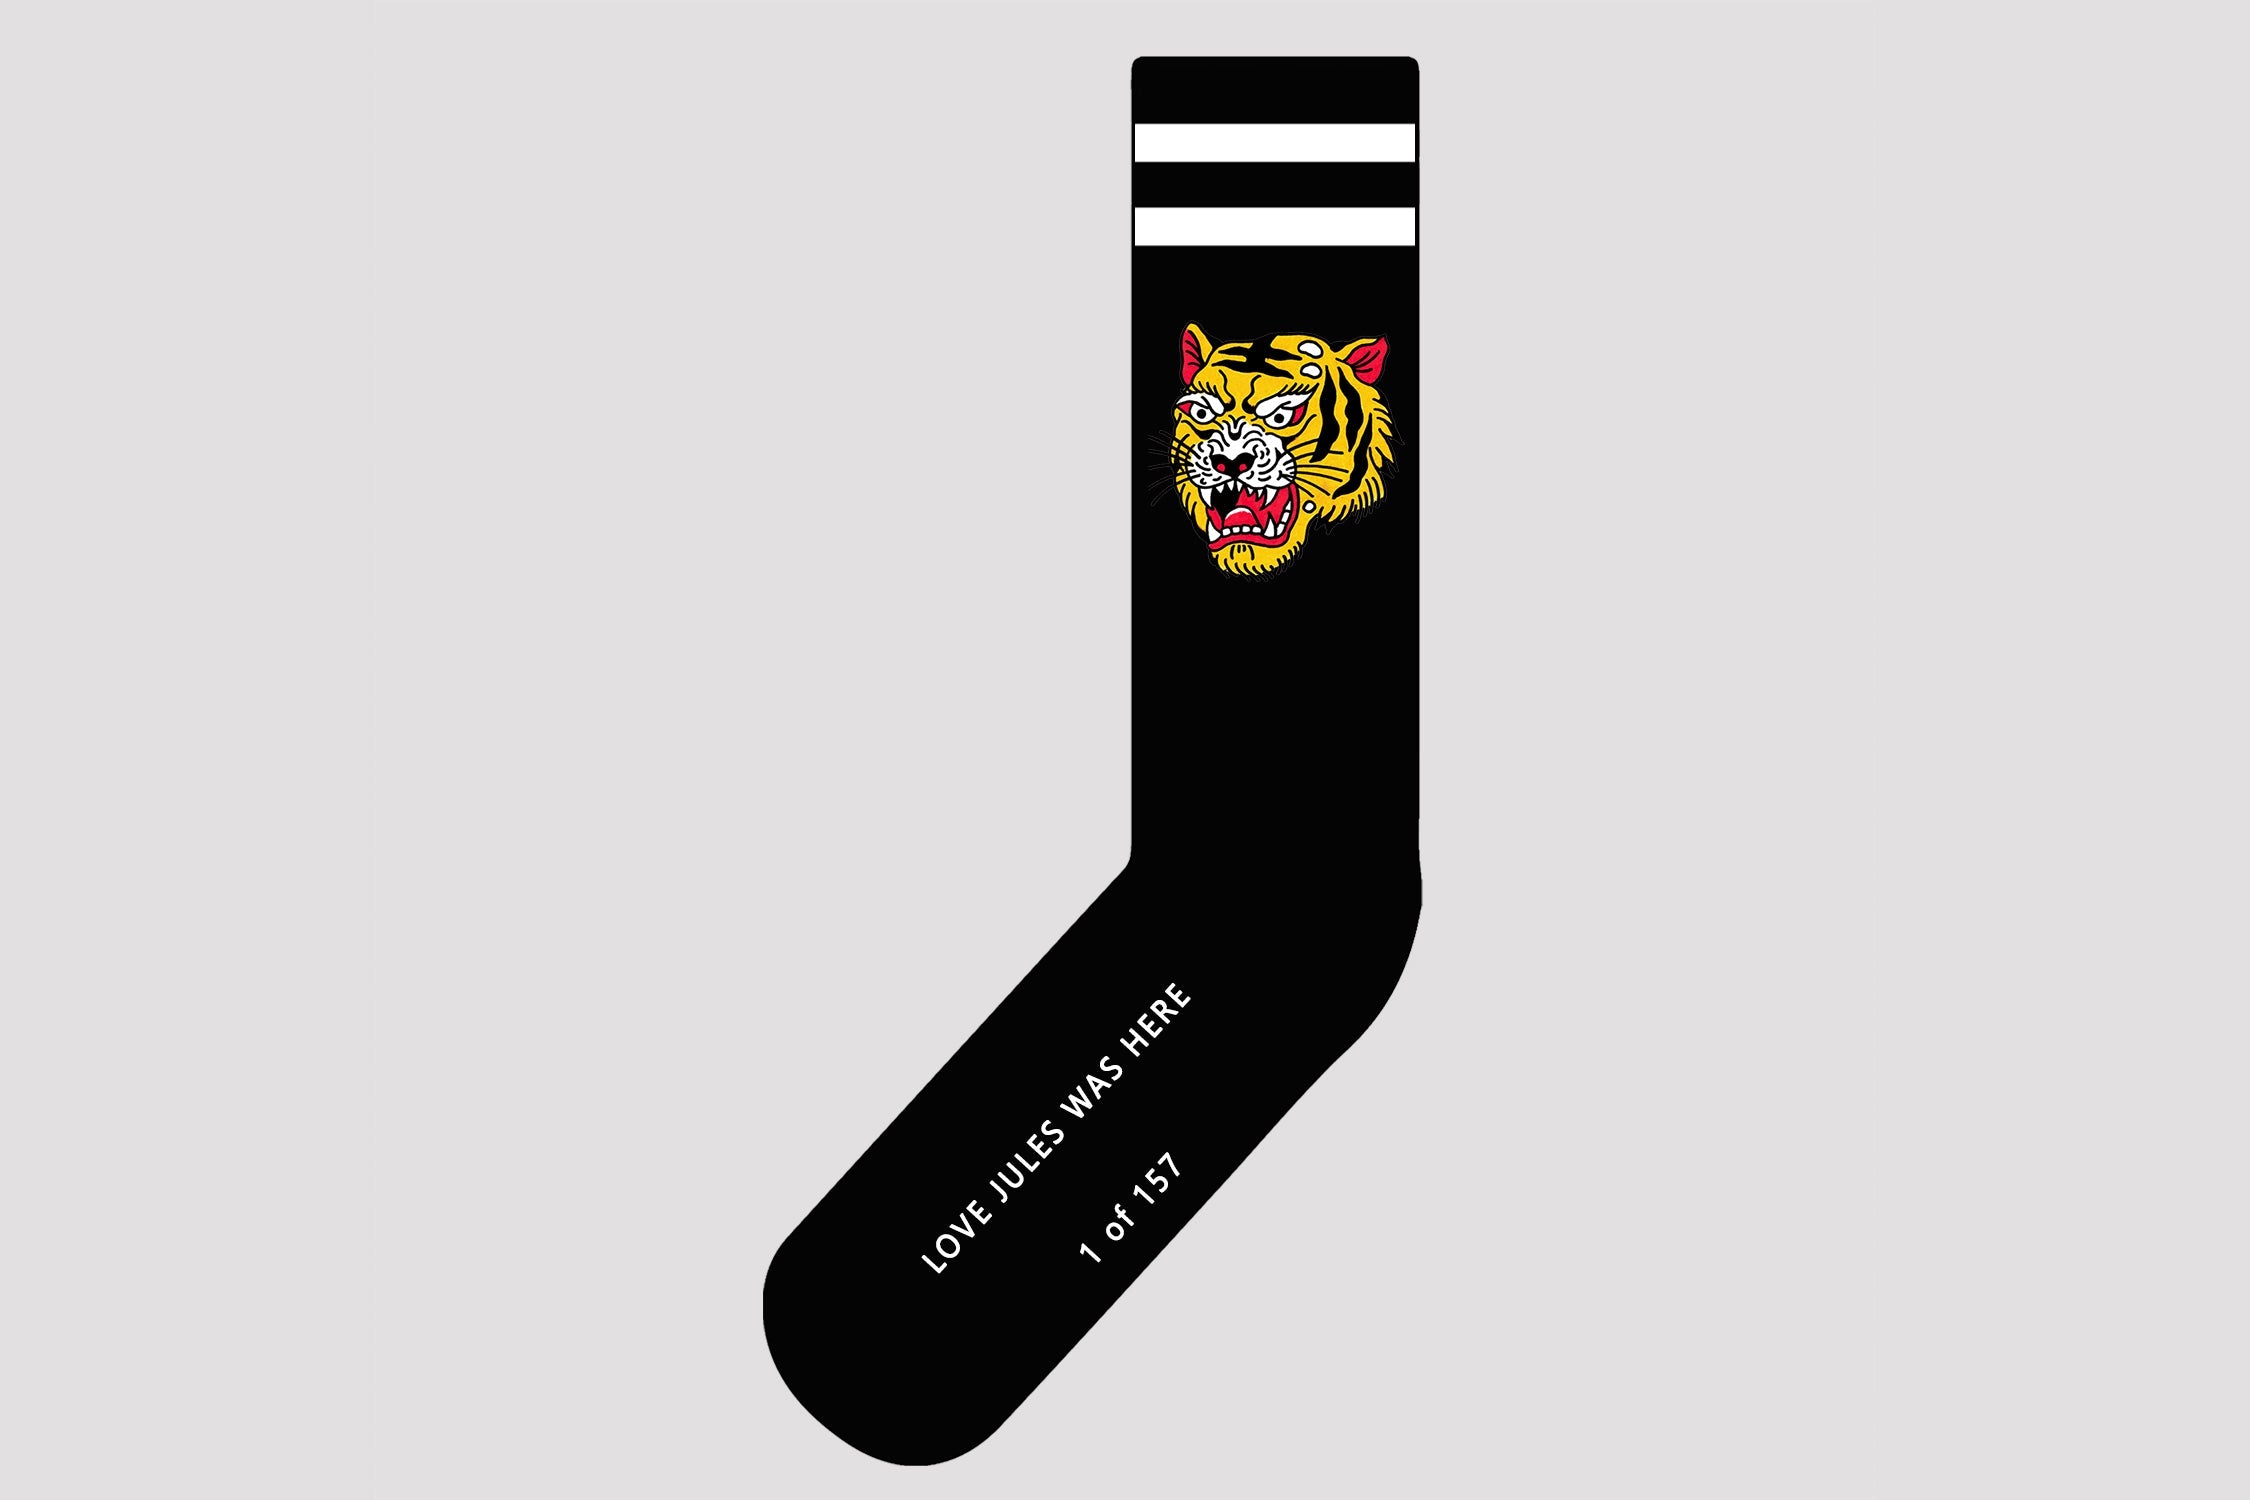 OUR FINAL LIMITED SOCK RUN